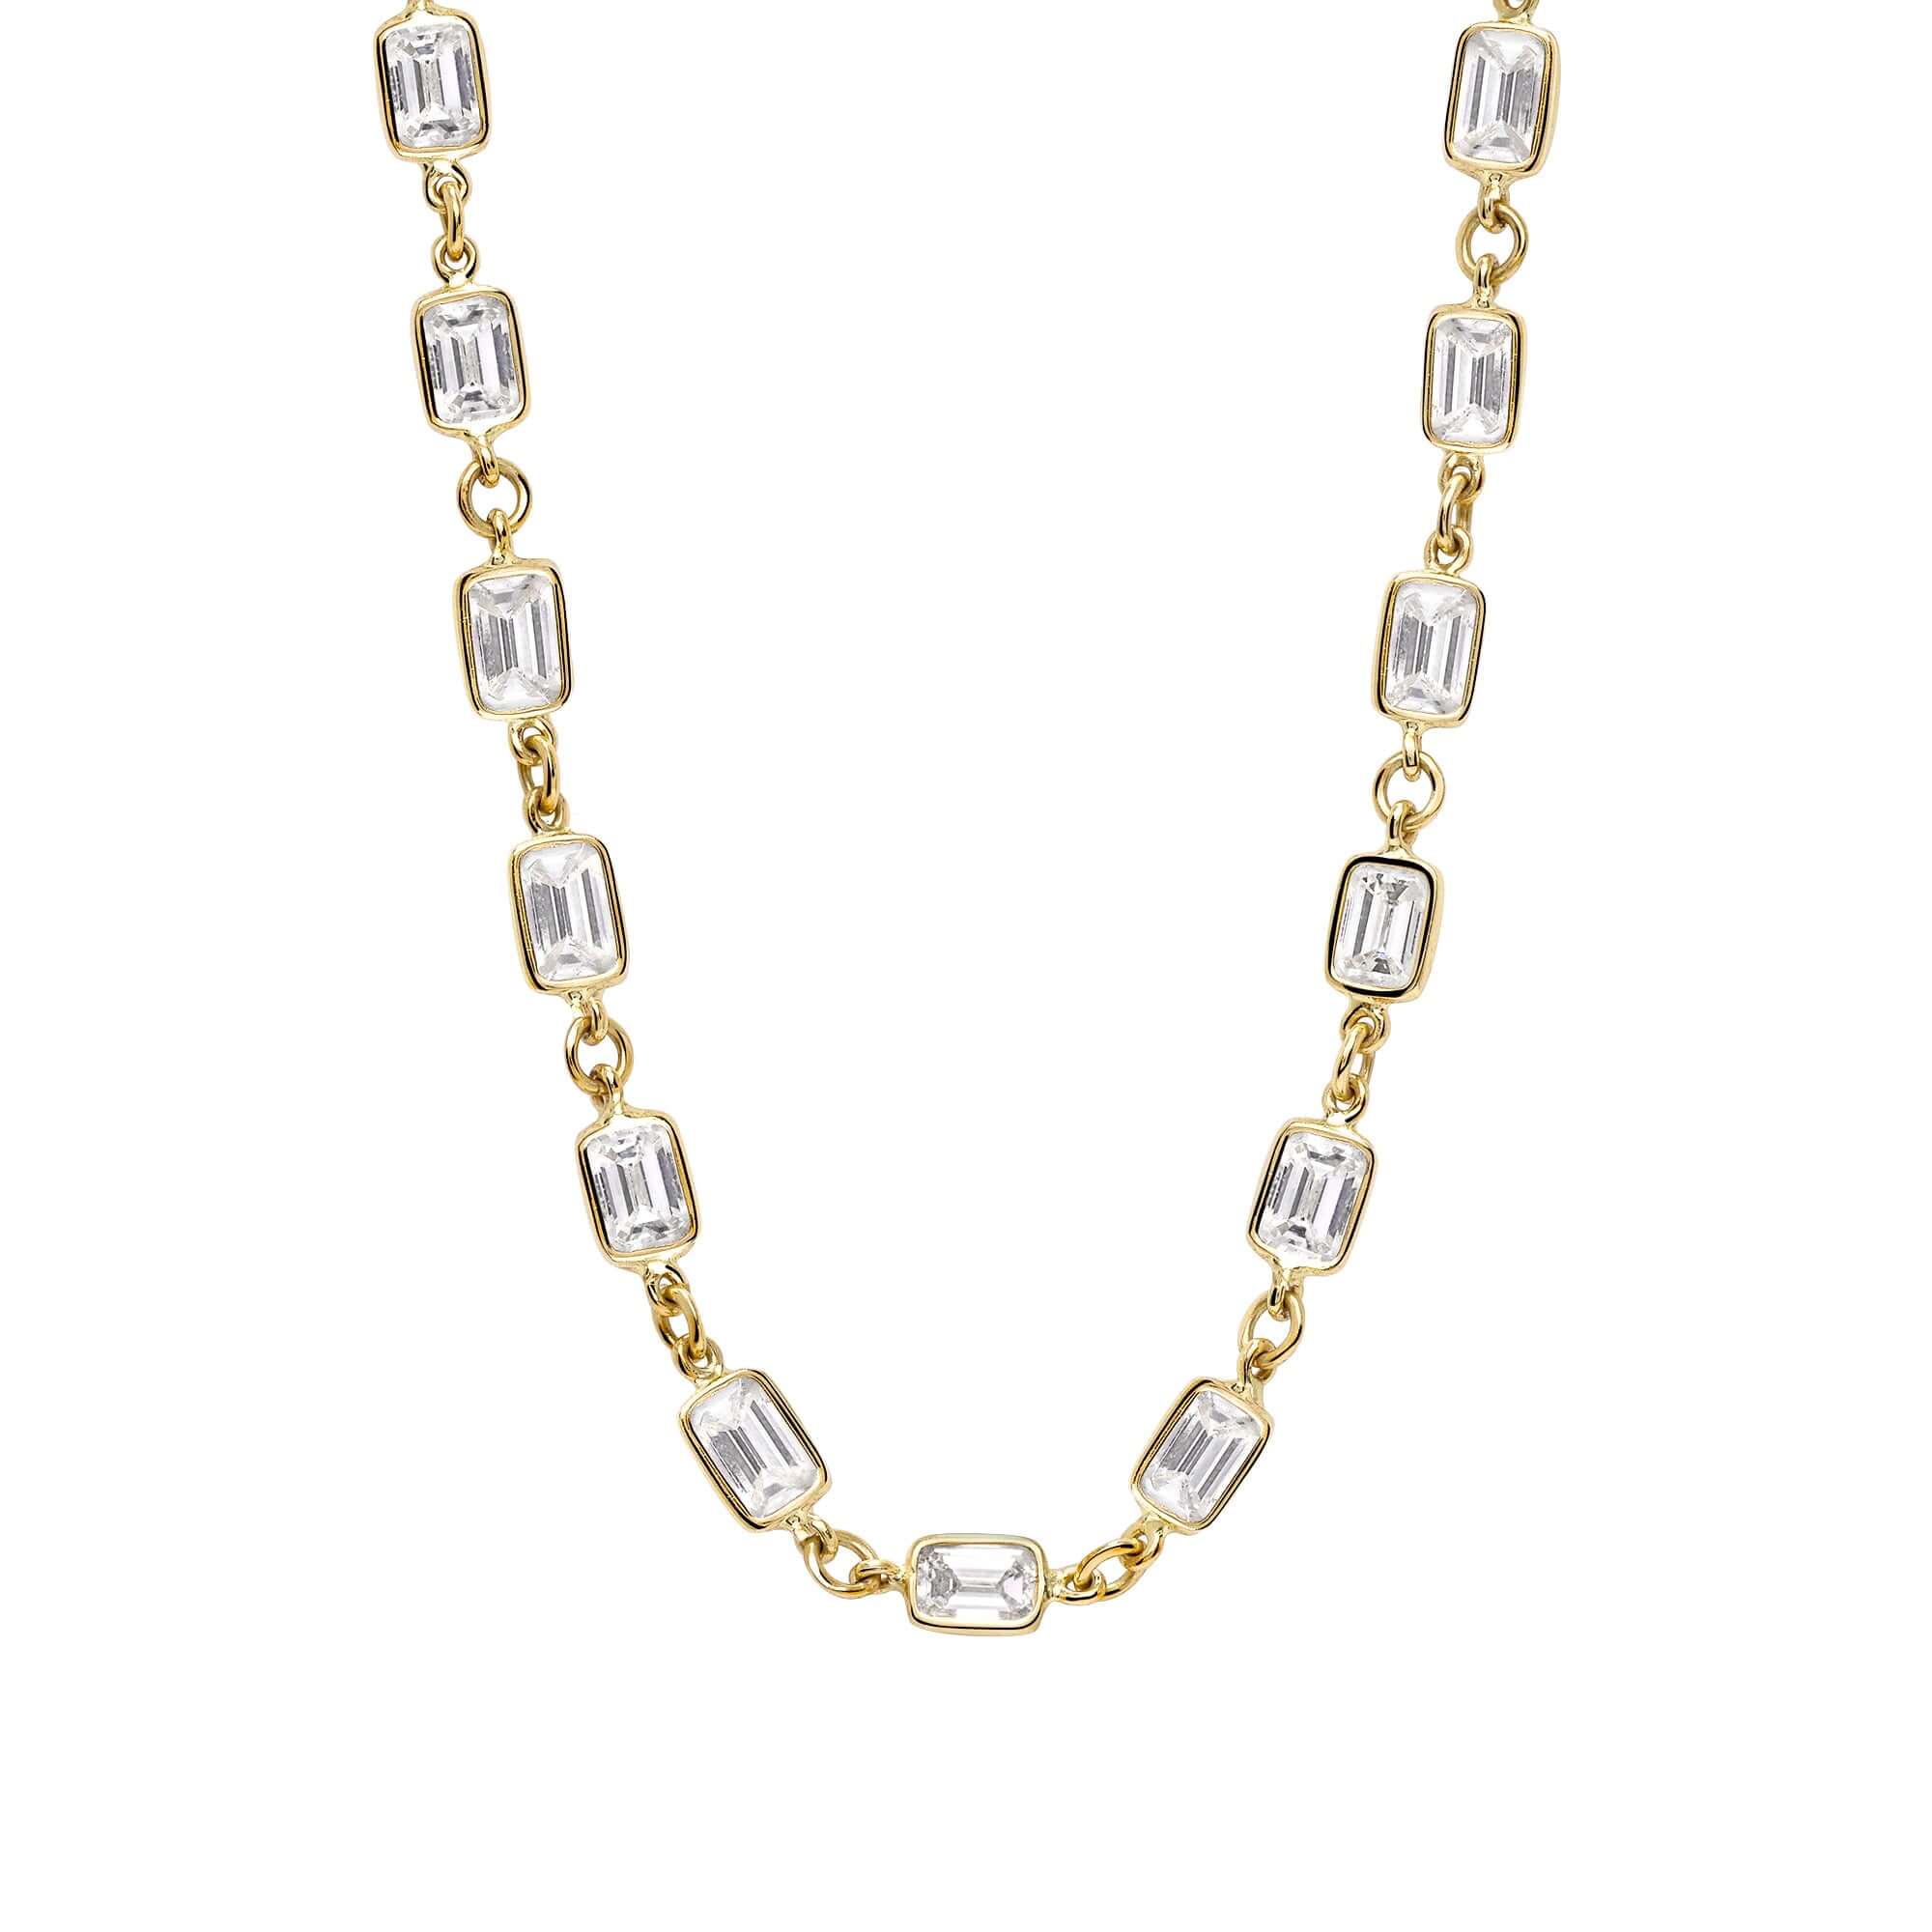 SINGLE STONE EMERALD CUT DIAMOND CHAIN featuring 13.22ctw M-N/VS emerald cut diamonds bezel set on a handcrafted 18K yellow gold chain. Chain measures 19.5"